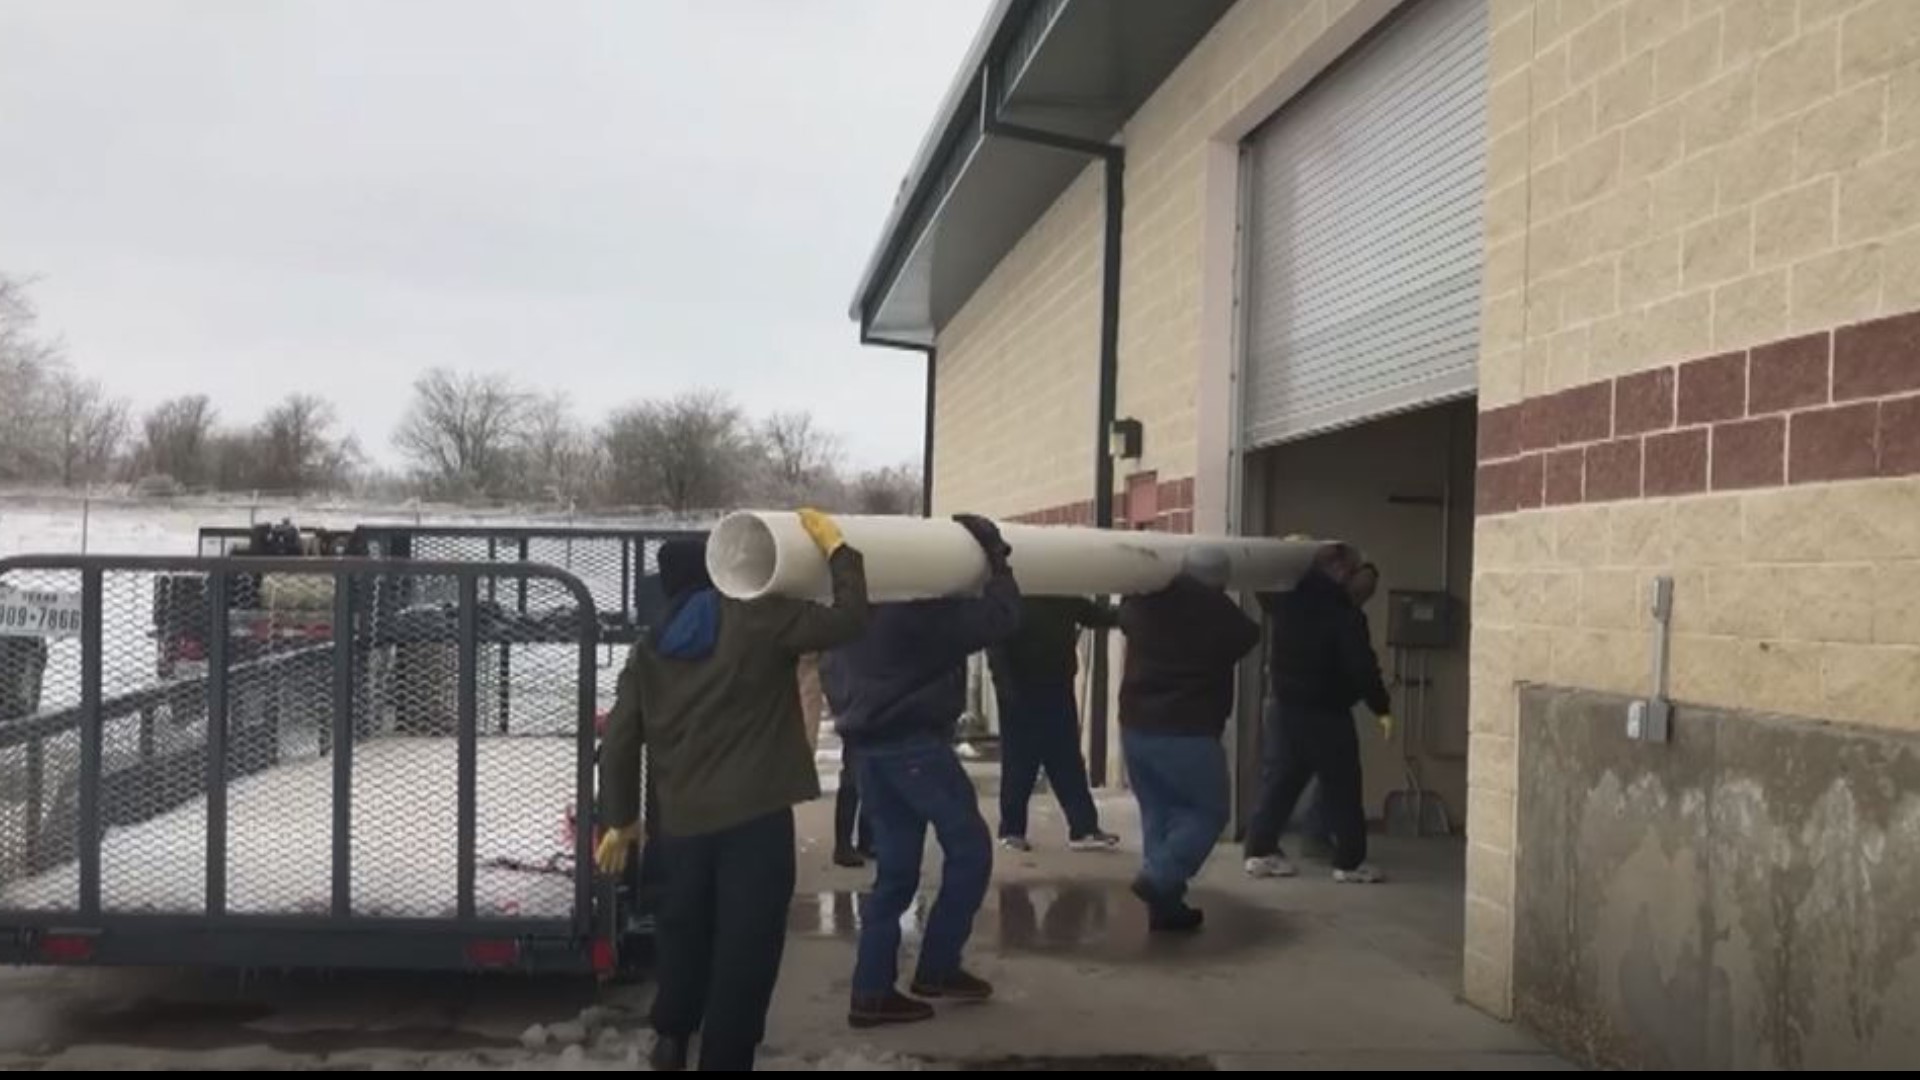 Community members helped with loading the heavy repair pipes and other materials that will be used to repair the water treatment plant.